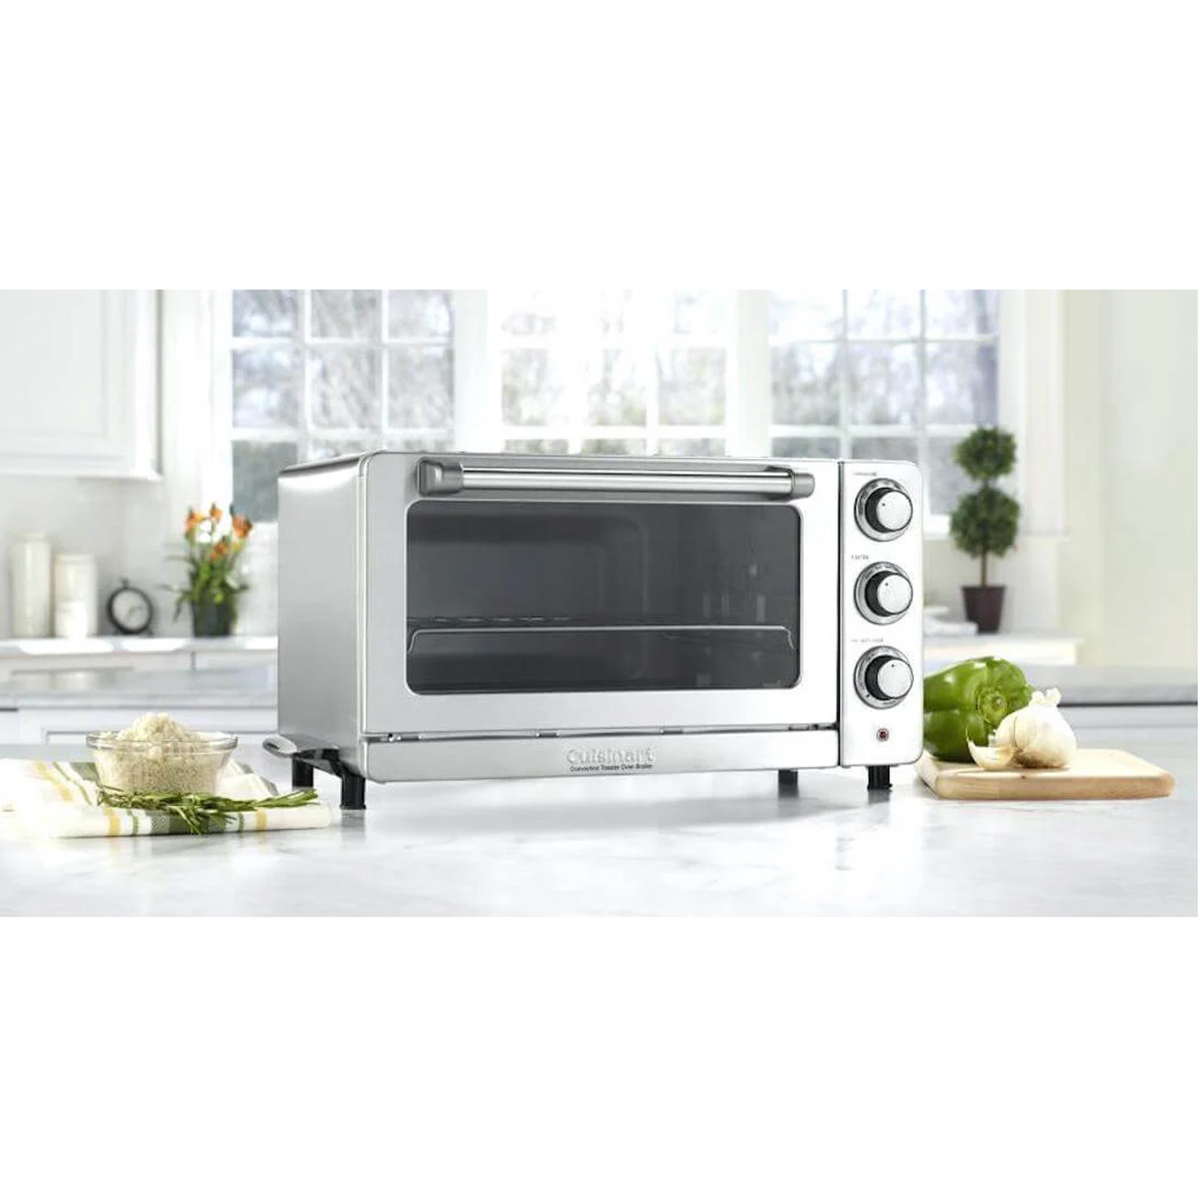 Cuisinart(R) Convection Toaster Oven Broiler